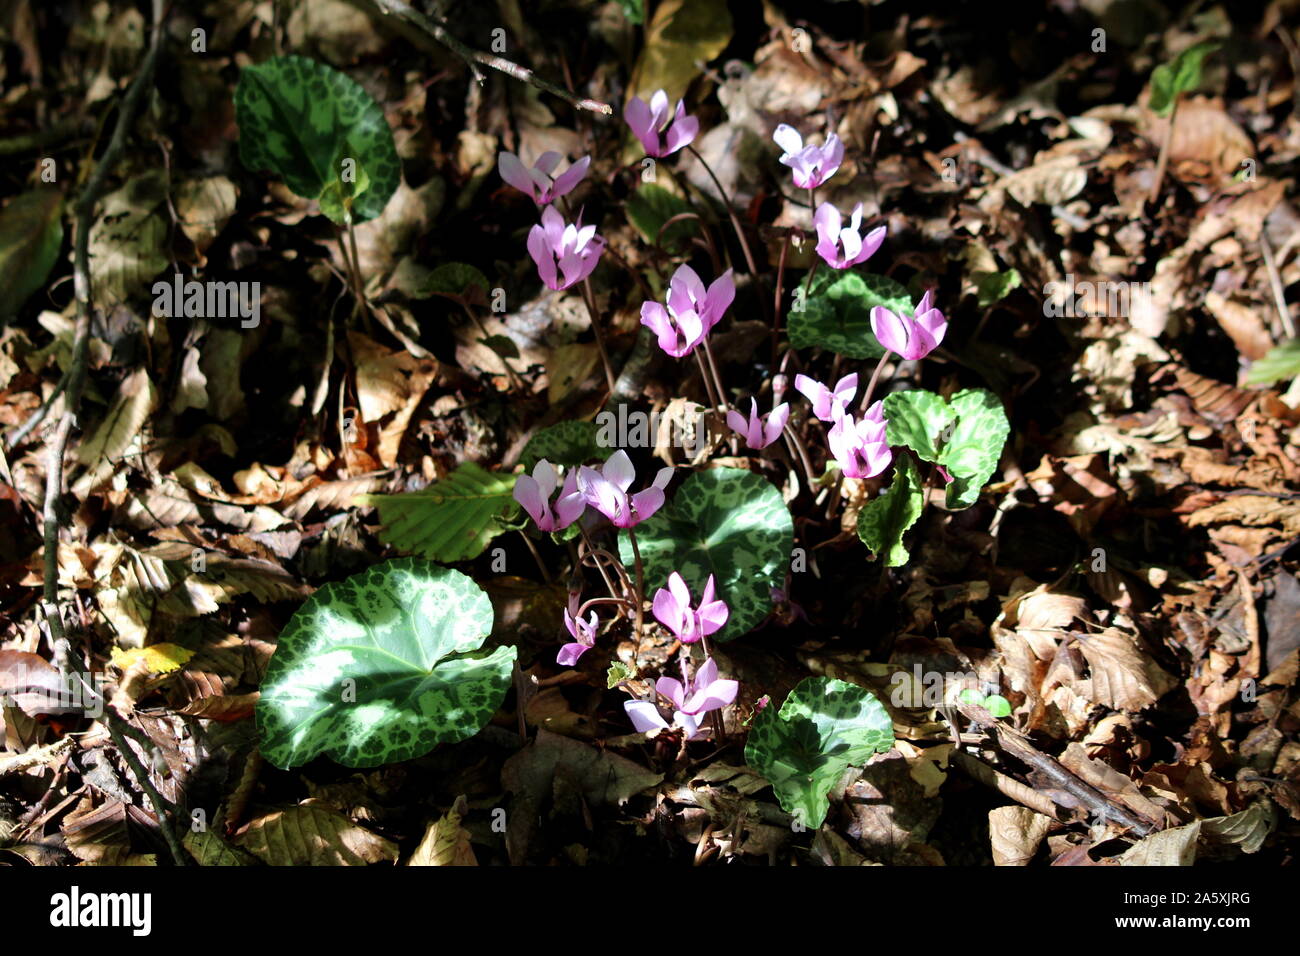 Purple cyclamen or Cyclamen purpurascens or Alpine cyclamen or European cyclamen tuberous perennial plant with variegated leaves and pink flowers Stock Photo